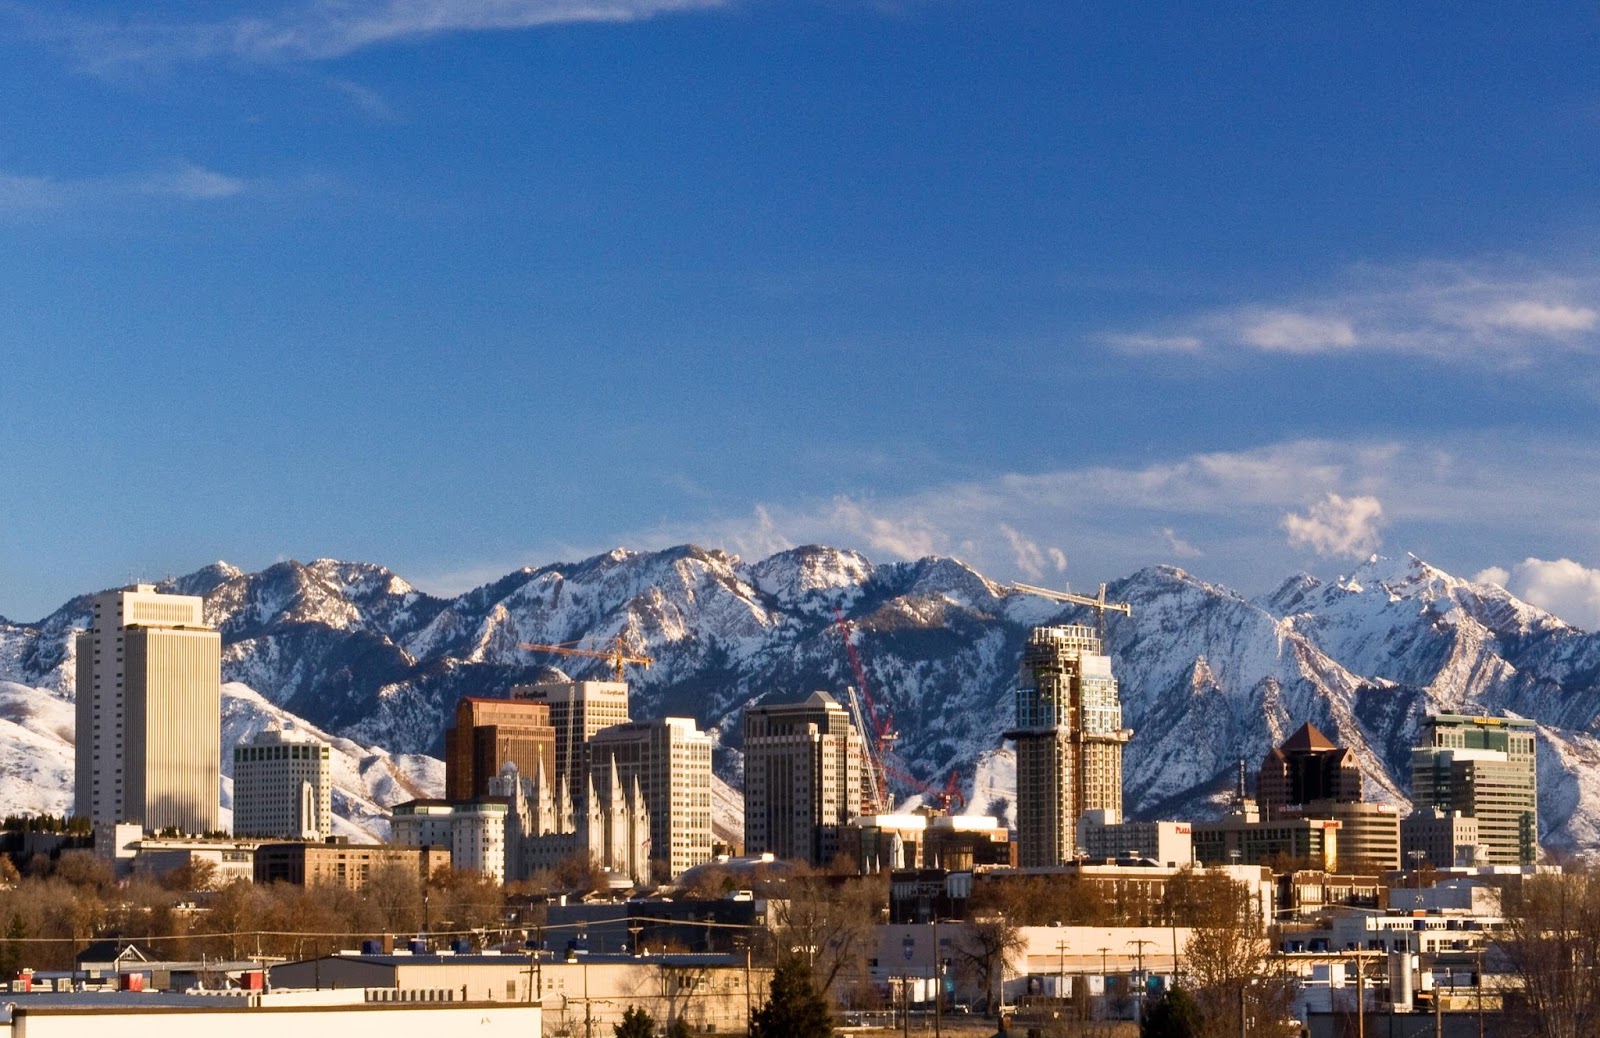 The Big Wobble Salt Lake City ties a 117 year heat record for